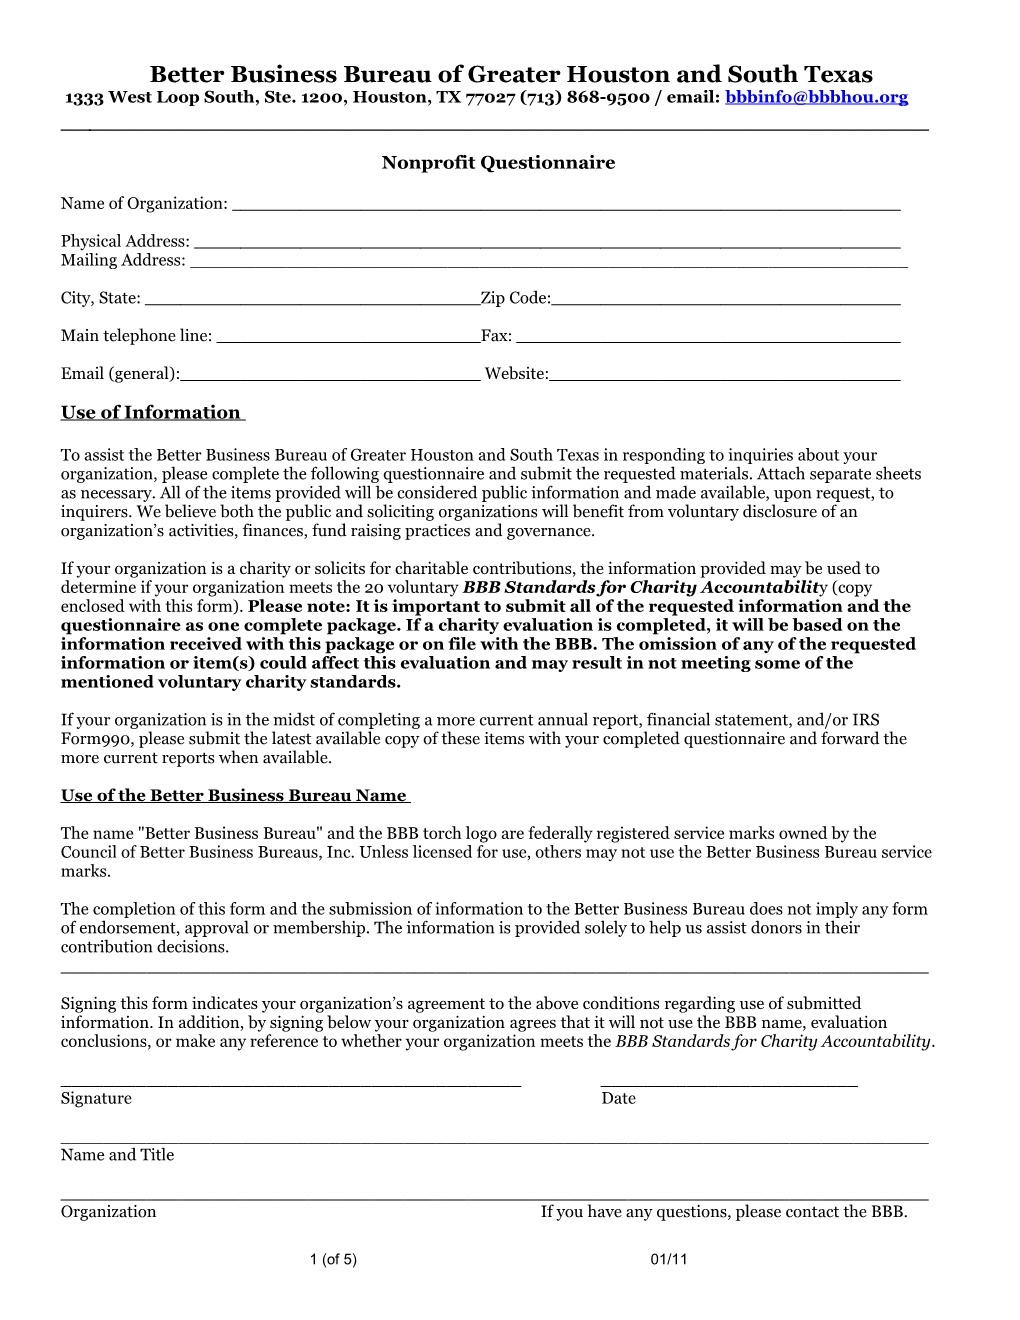 Sample: Questionnaire for Soliciting Nonprofit Organizations